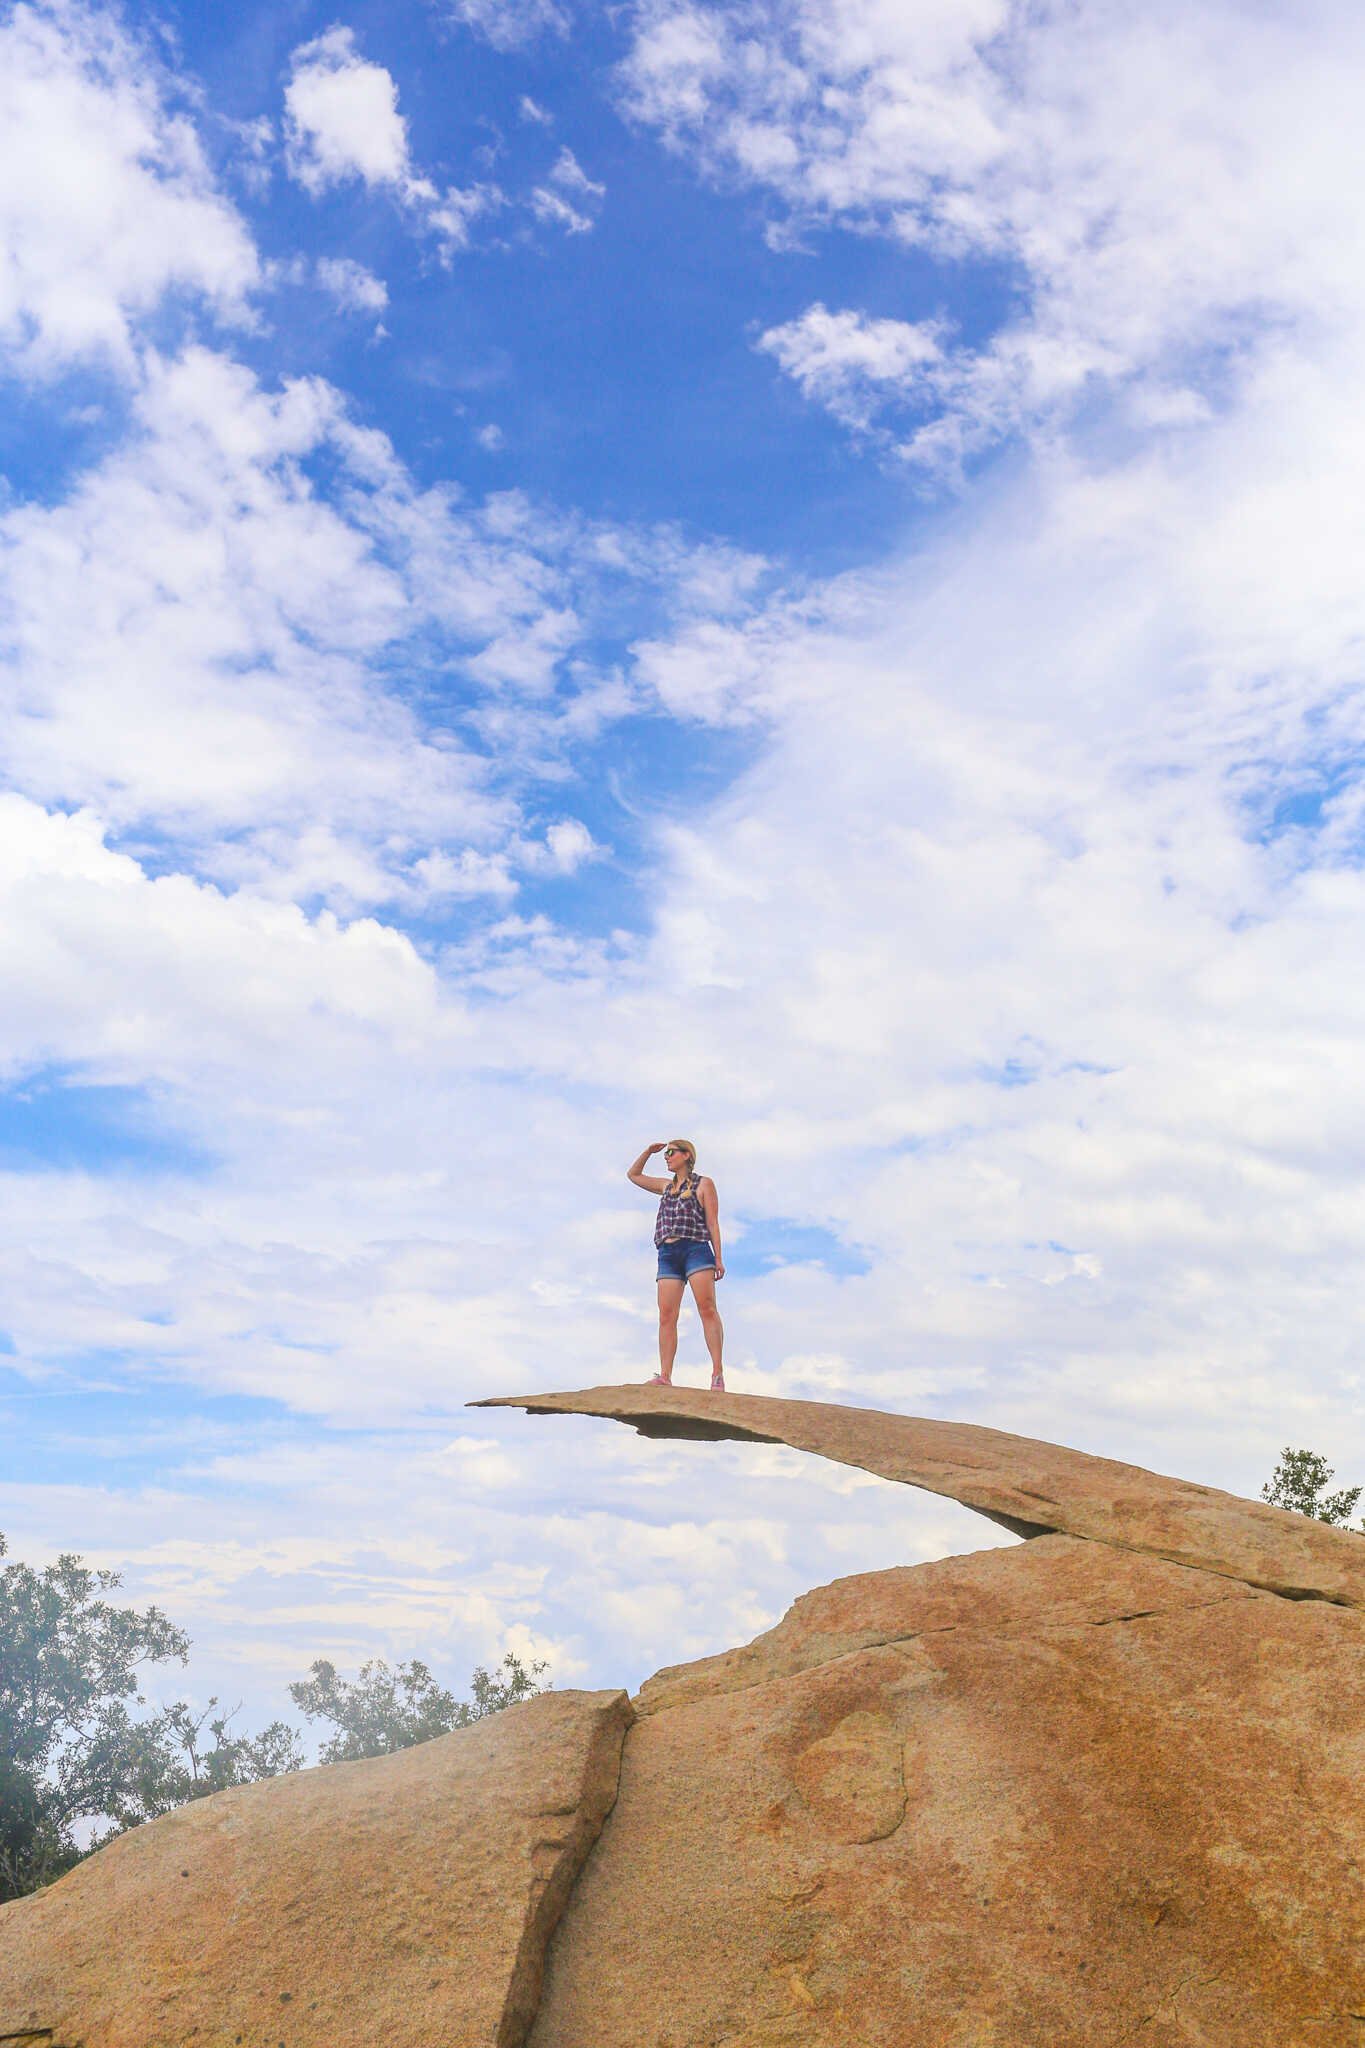 Beautiful Places in San Diego to Take Family Pictures - Photos taken at Potato Chip Rock.